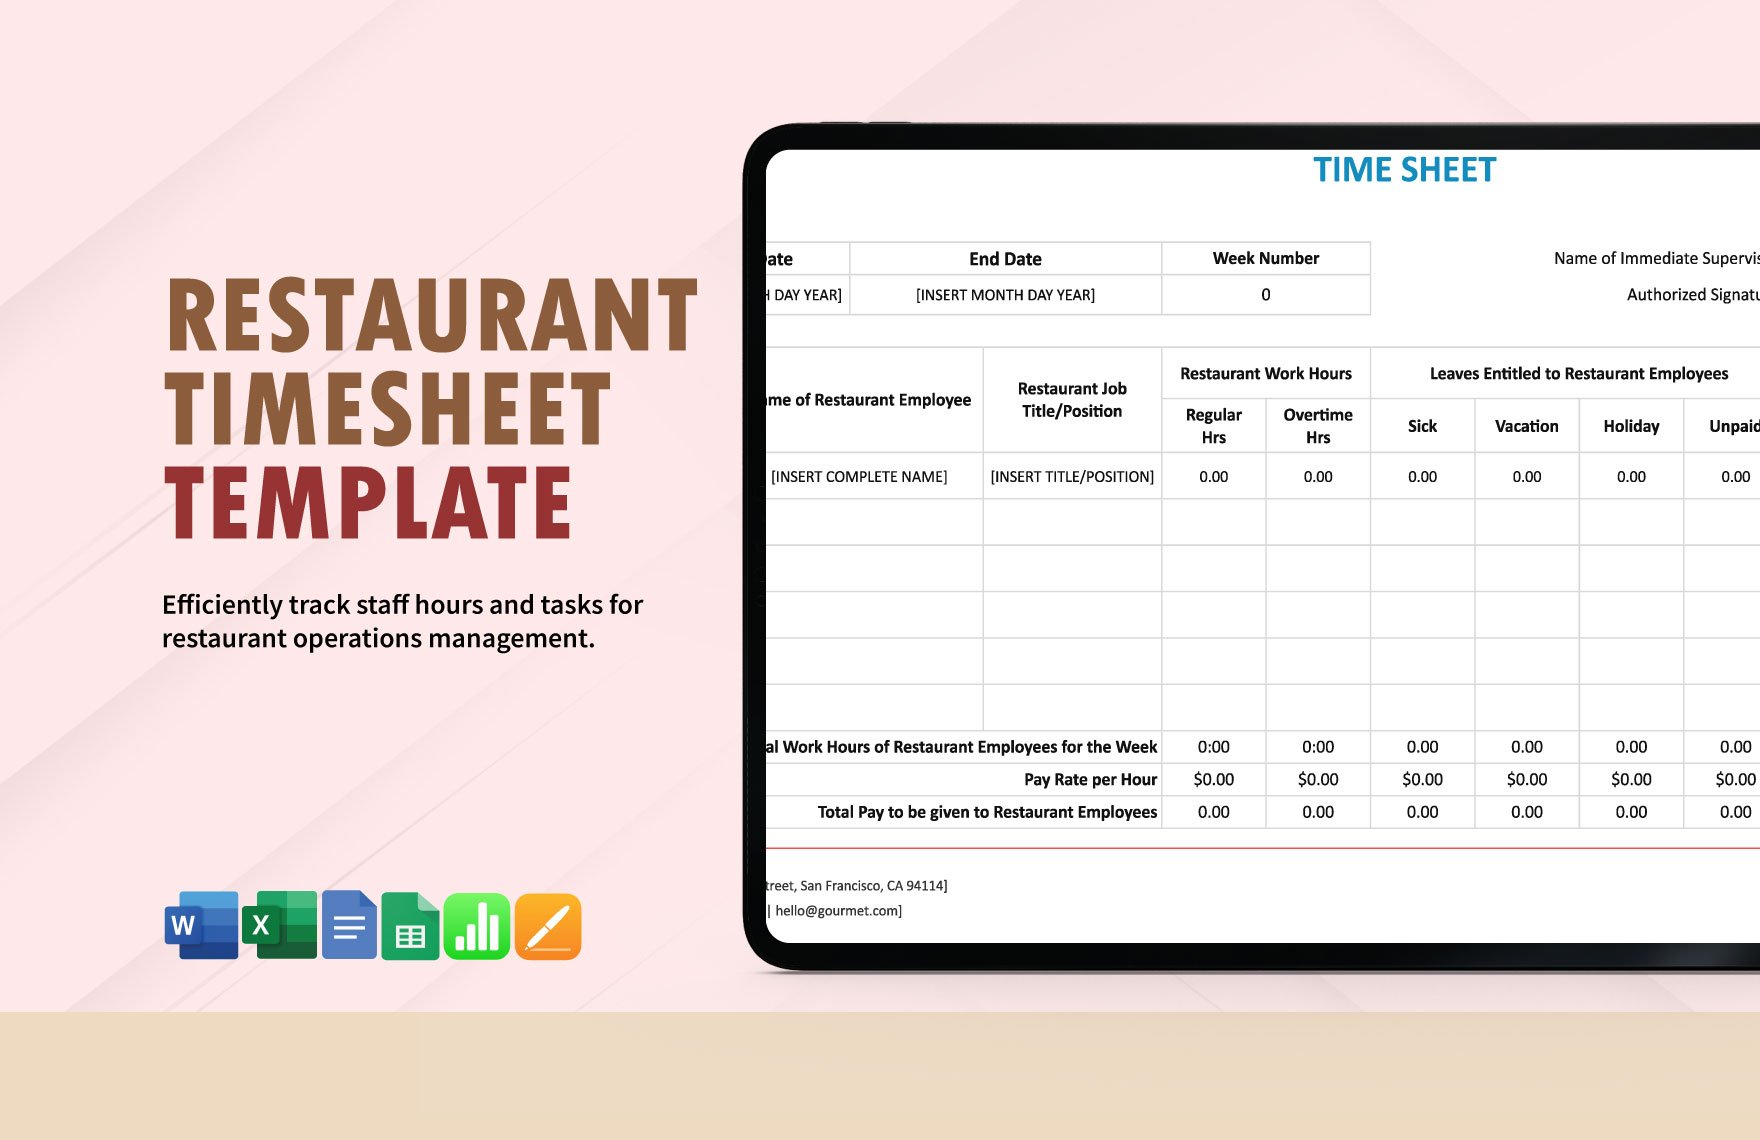 Restaurant Time Sheet Template in Word, Google Docs, Excel, Google Sheets, Apple Pages, Apple Numbers